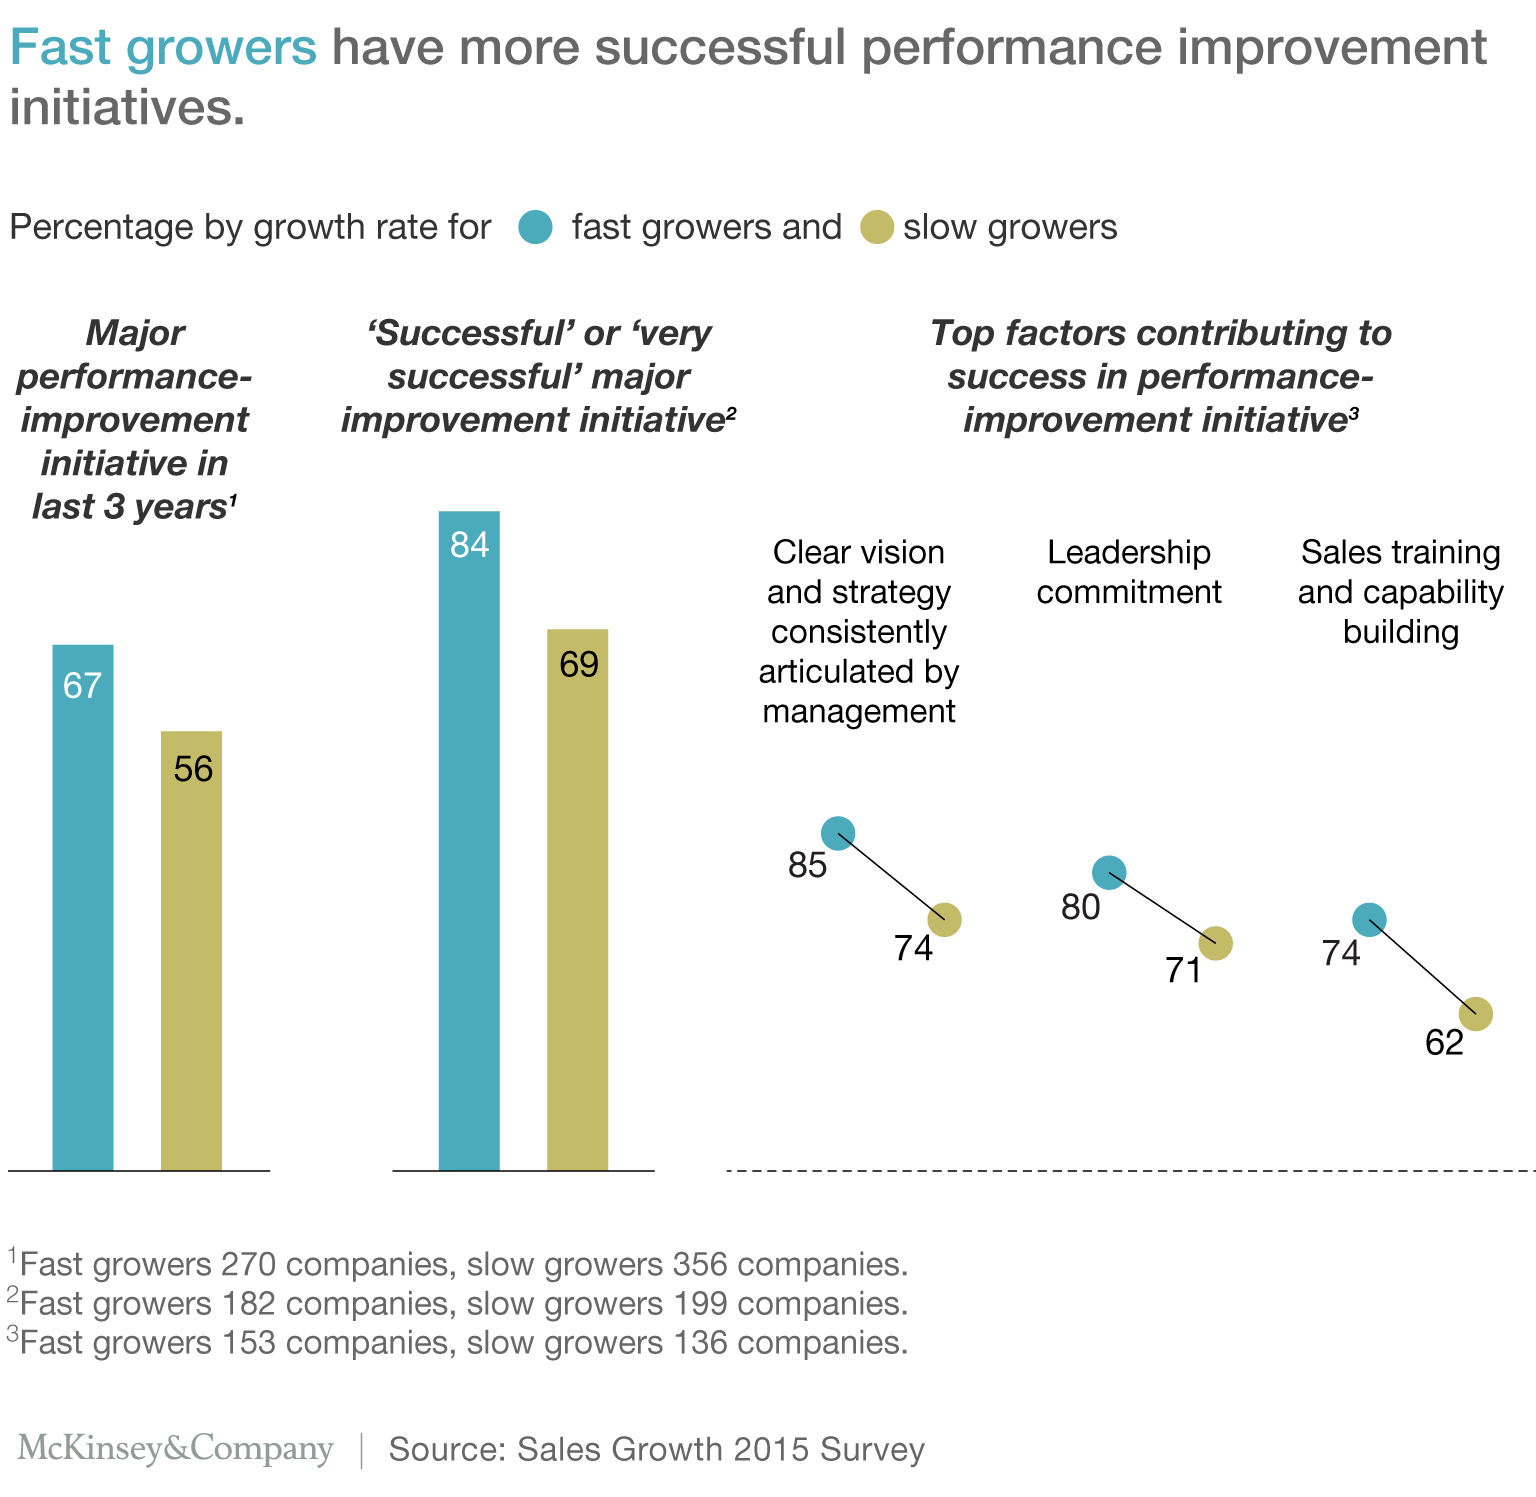 Exhibit 5: Fast growers have more successful performance improvement initiatives